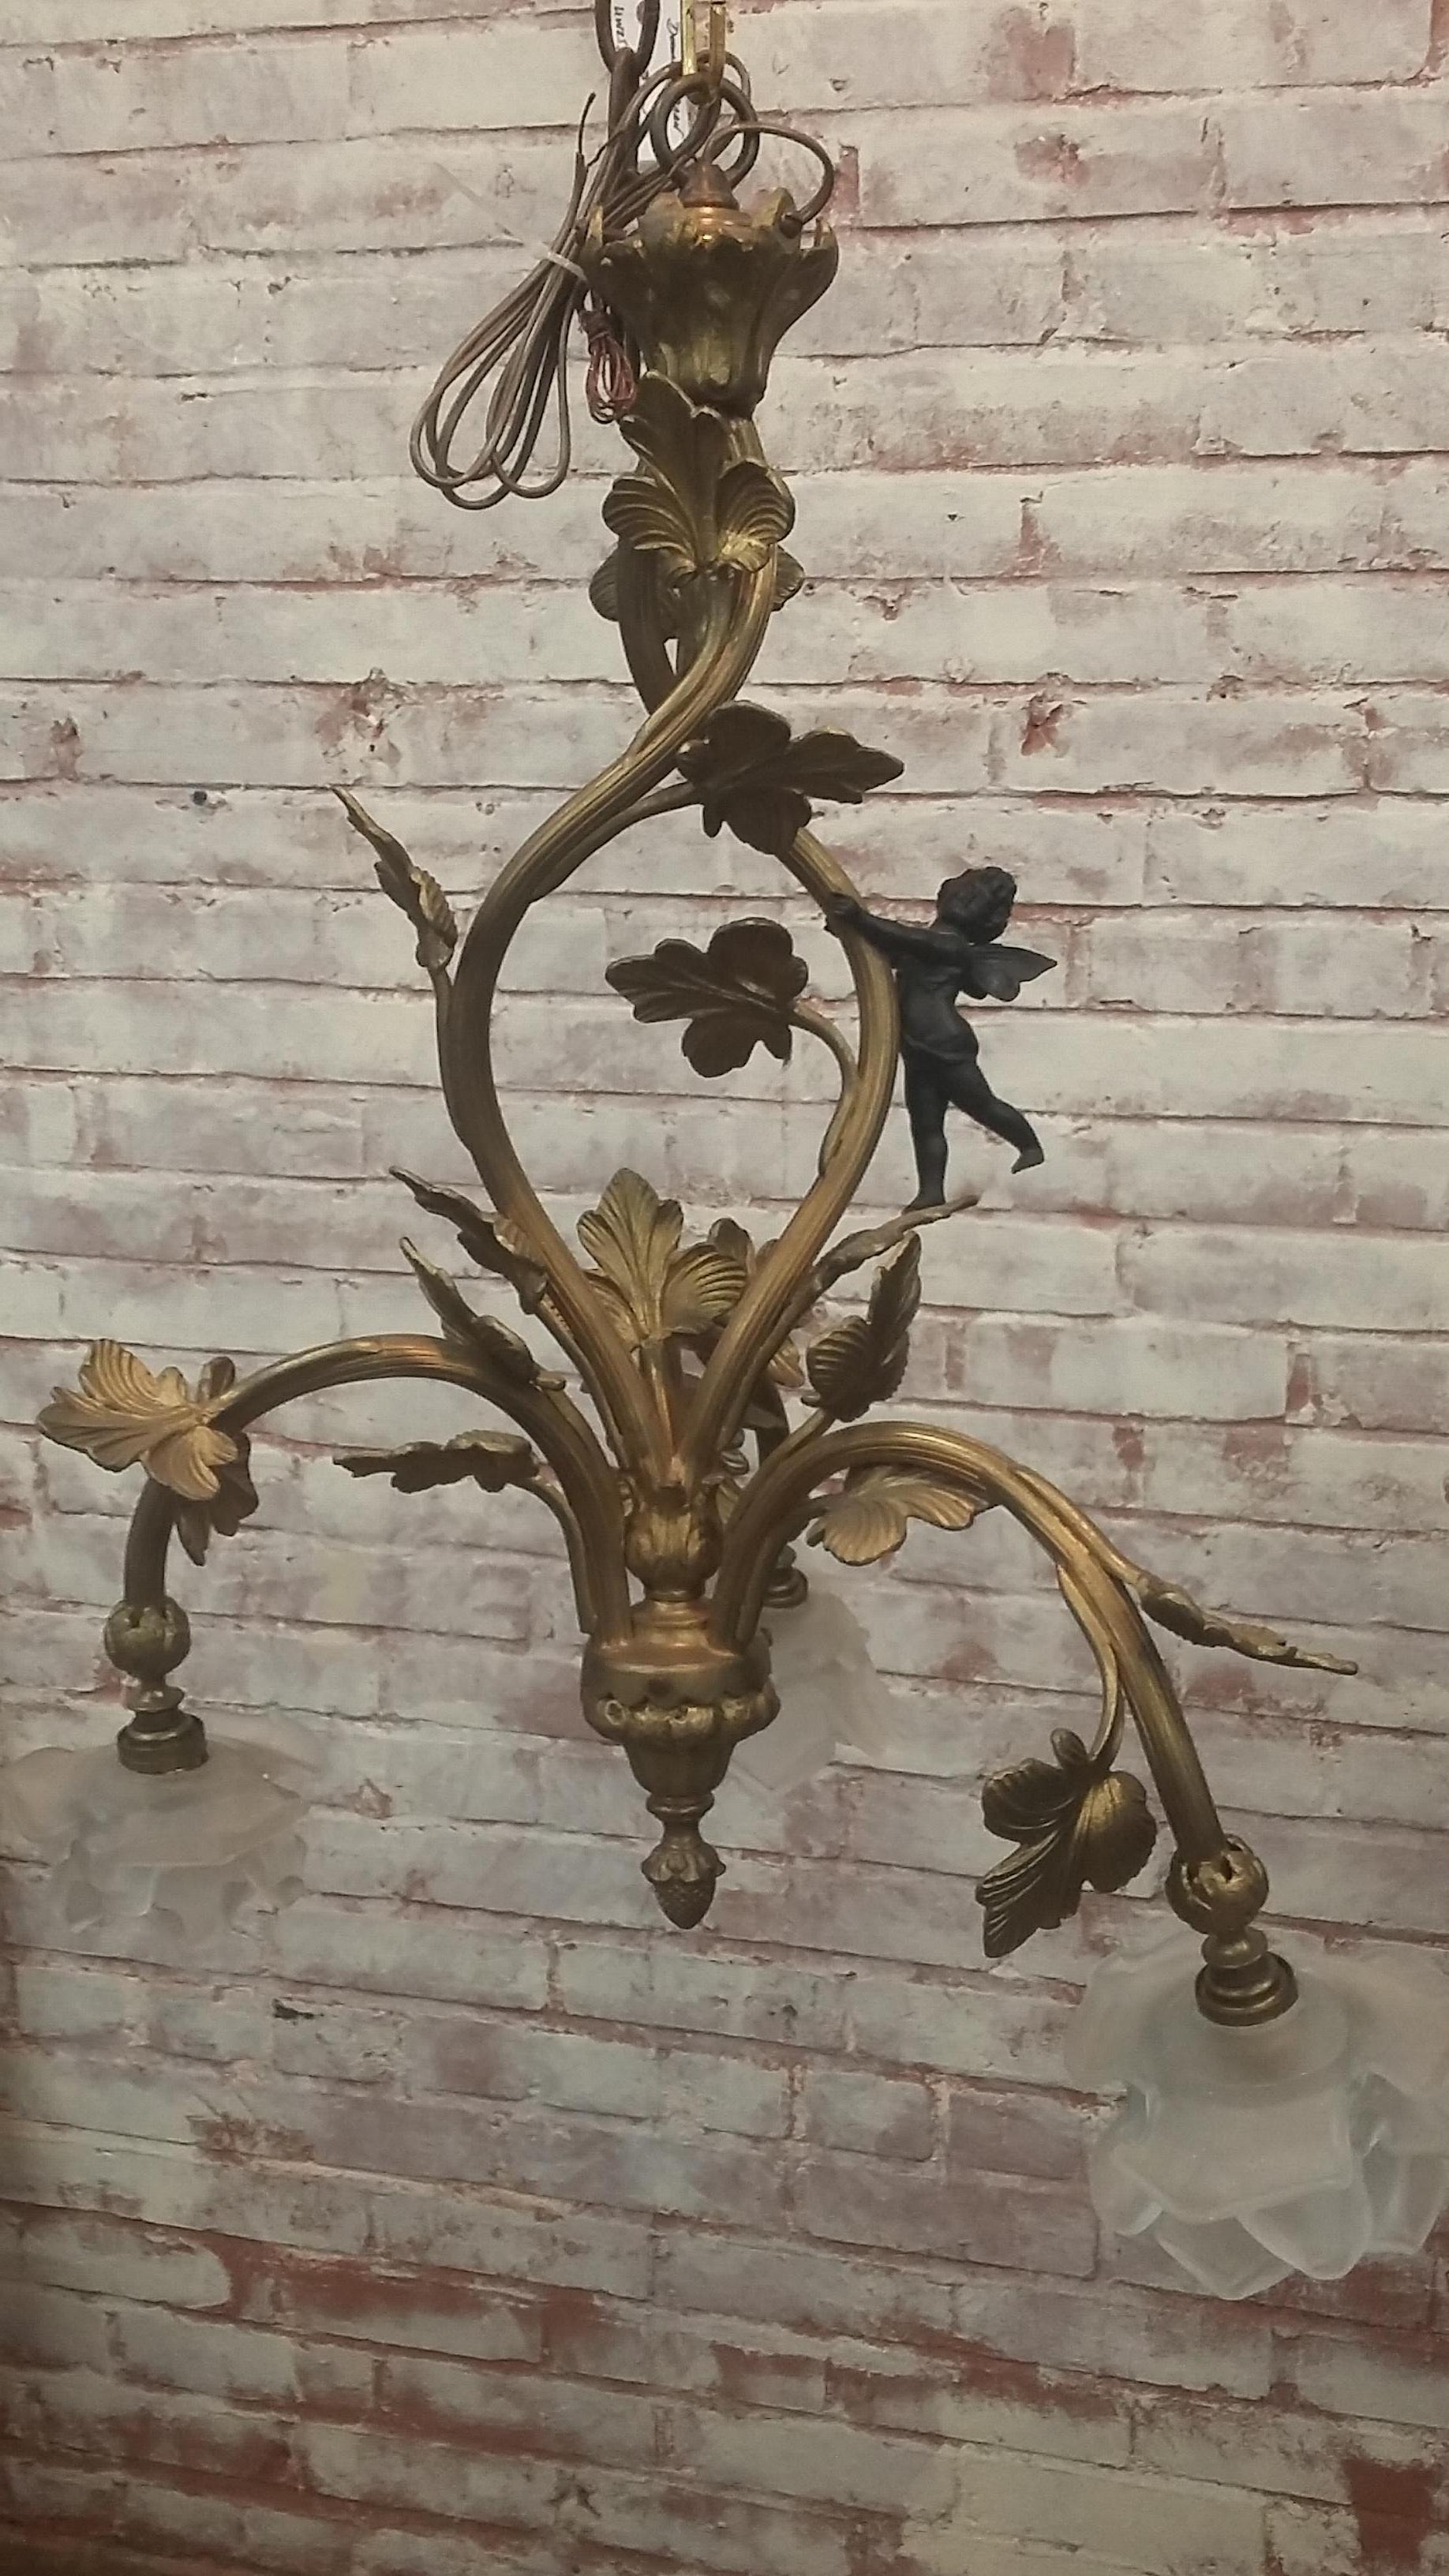 Beautiful vintage 19th century bronze cherub chandelier from France. All repolished and rewired for installation.
Terrific style 3 lights with cherub at the top. Nice one for the bedroom or foyer.
